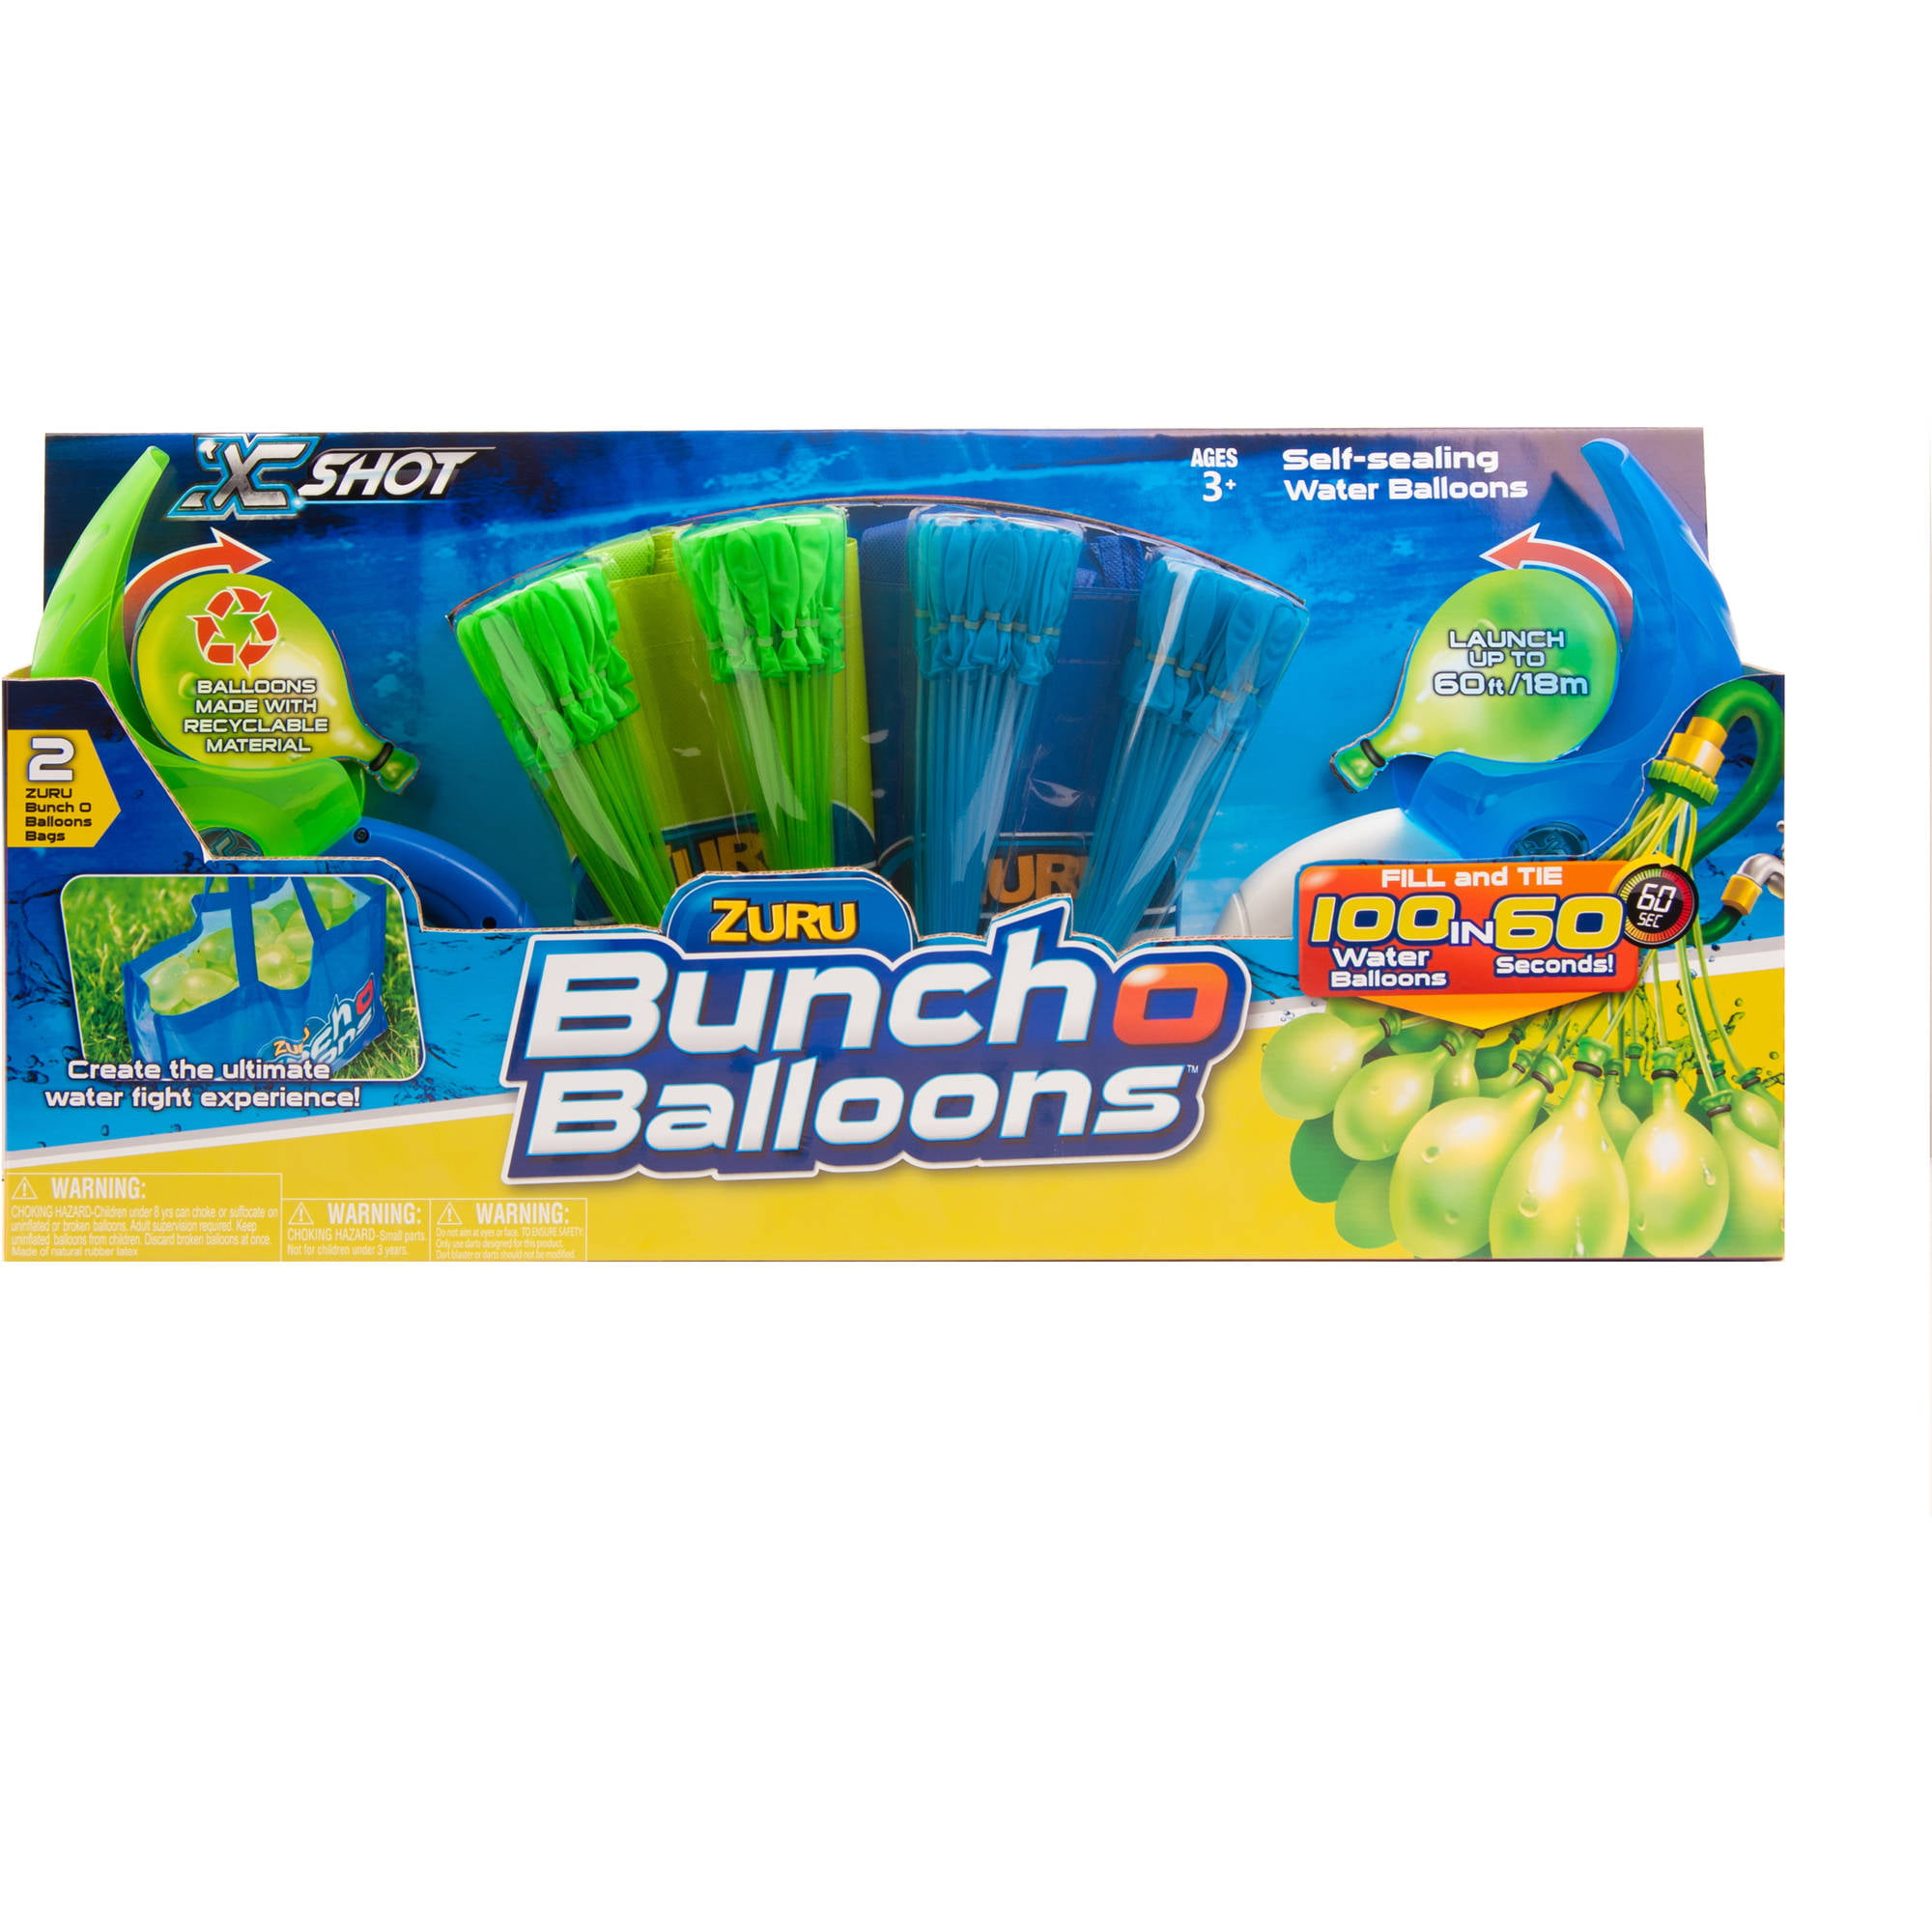 Imperial KAOS Water Balloons 250-Pack with 2 Faucet Fillers 21278